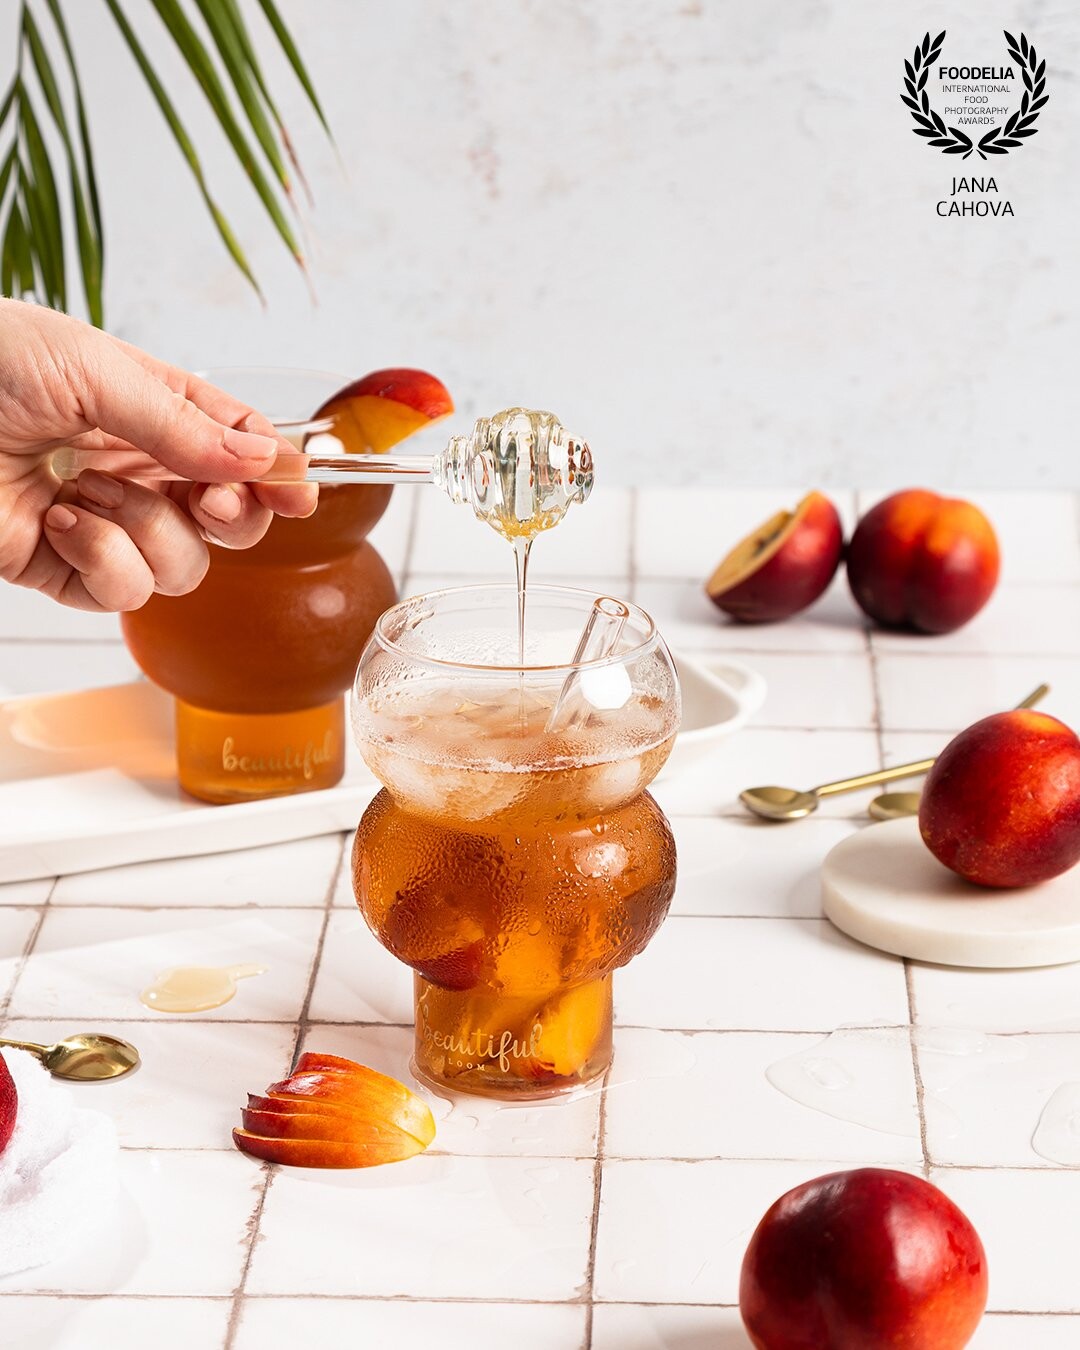 In this picture I wanted to emphasize simple color pallete. Brigthness, warm colors and a light setting gives the feeling of perfect summer. Peach iced tea for a super hot day... Ice cubes, palm leaf and golden details to complement the setting.